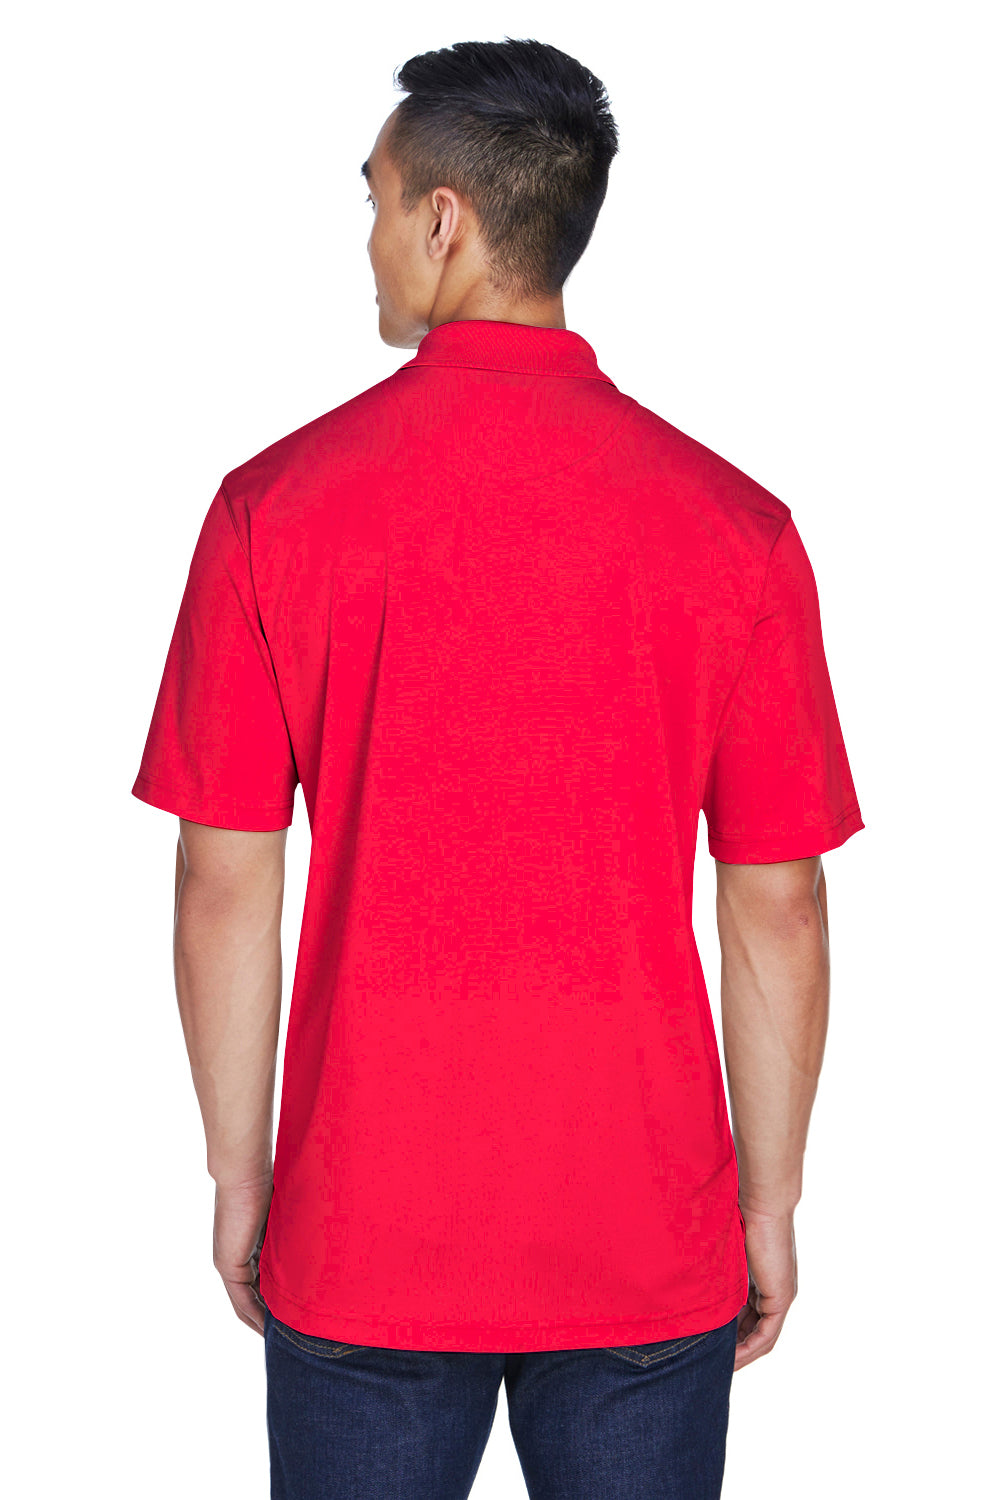 UltraClub 8405 Mens Cool & Dry Moisture Wicking Short Sleeve Polo Shirt Red Back